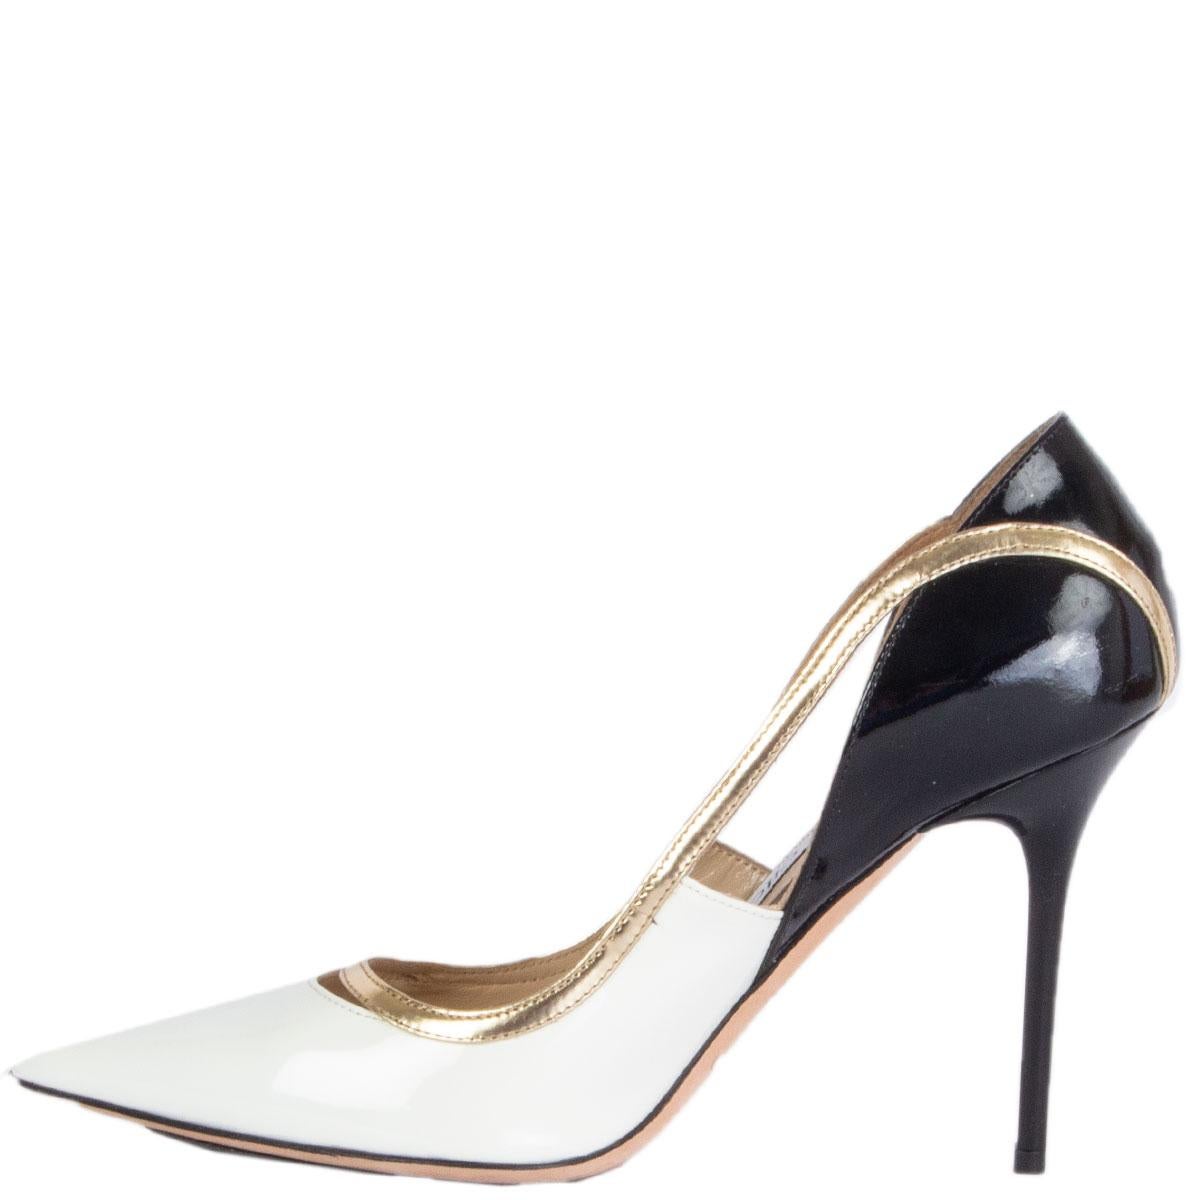 Beige JIMMY CHOO white black gold patent leather VIPER Pumps Shoes 36